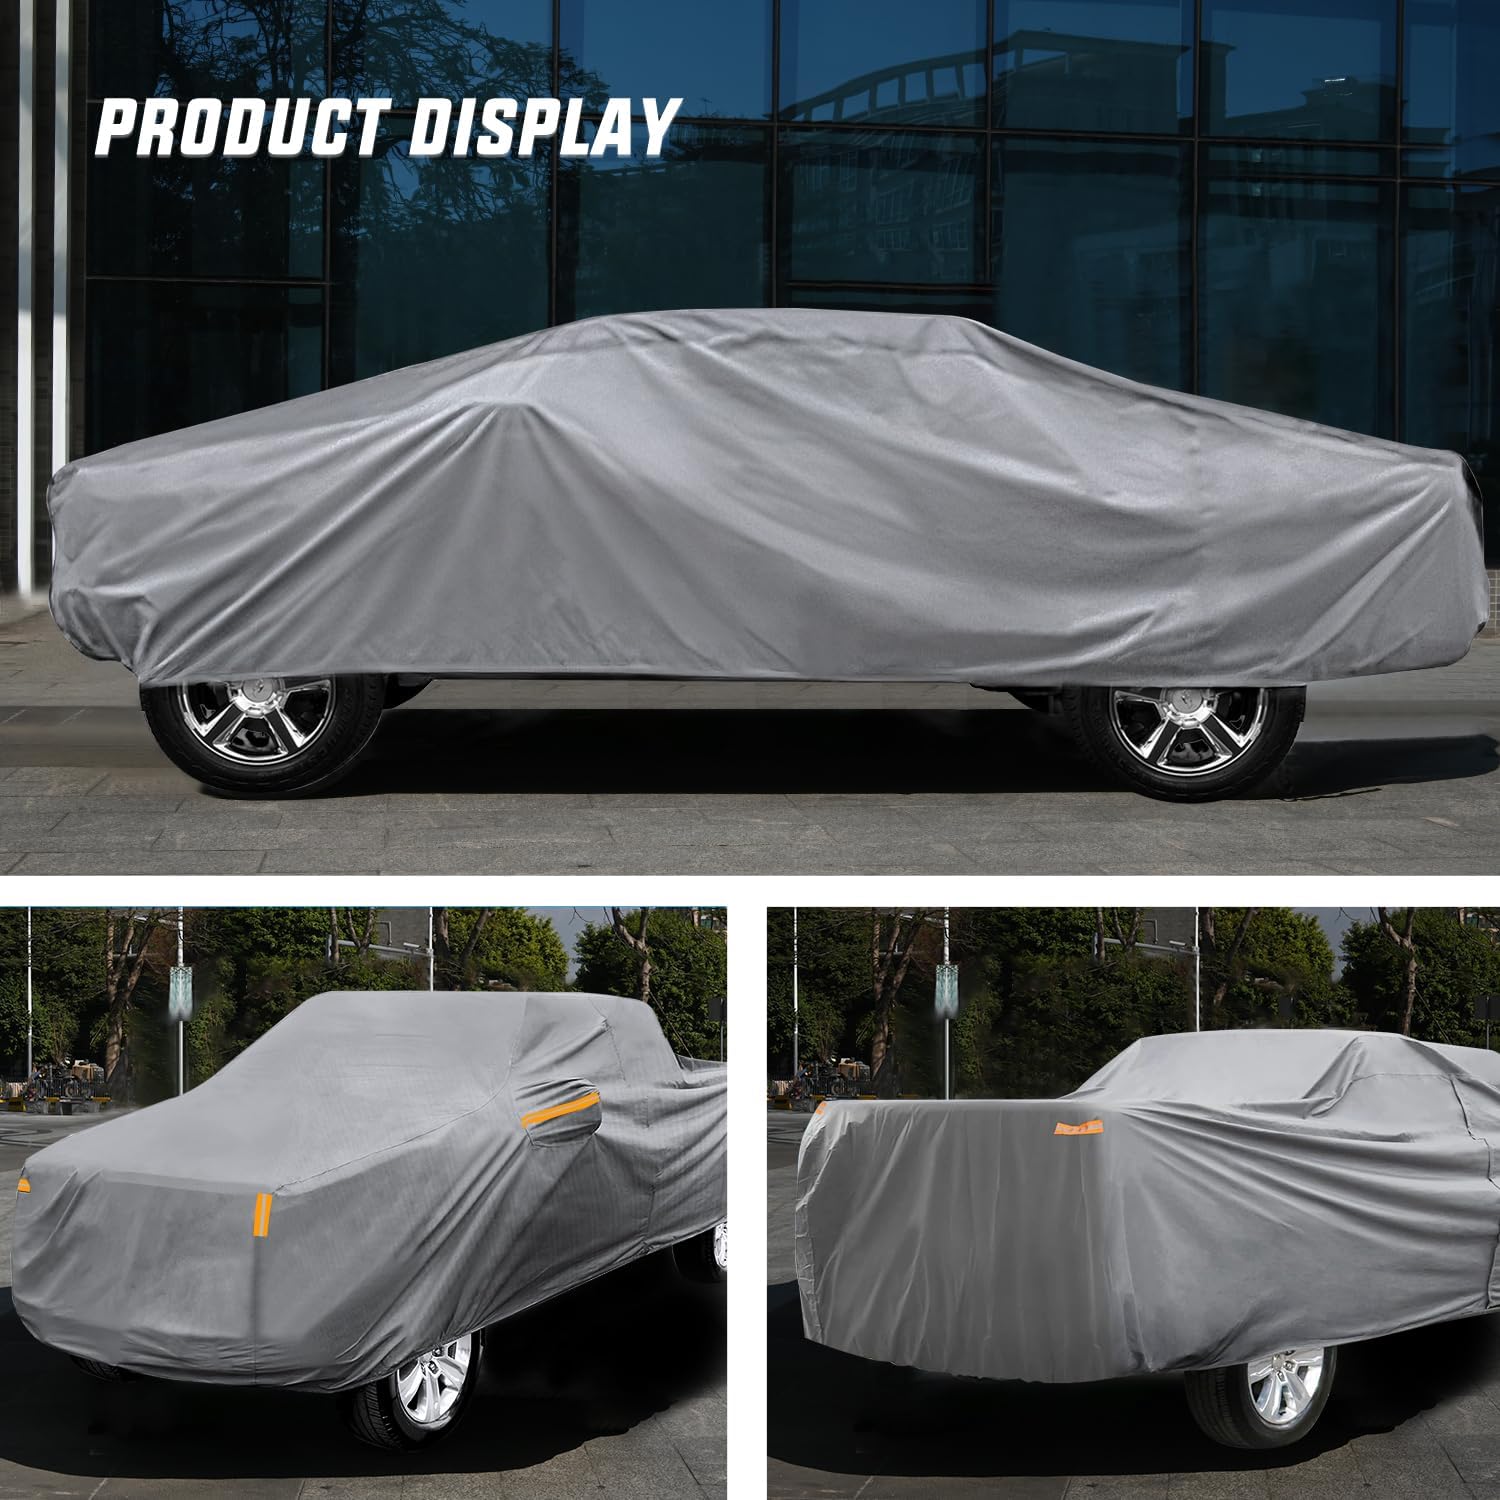 Universal Fit for Truck (Up to 228" Max Cab Length 144") Car Cover UV Protection Nilight